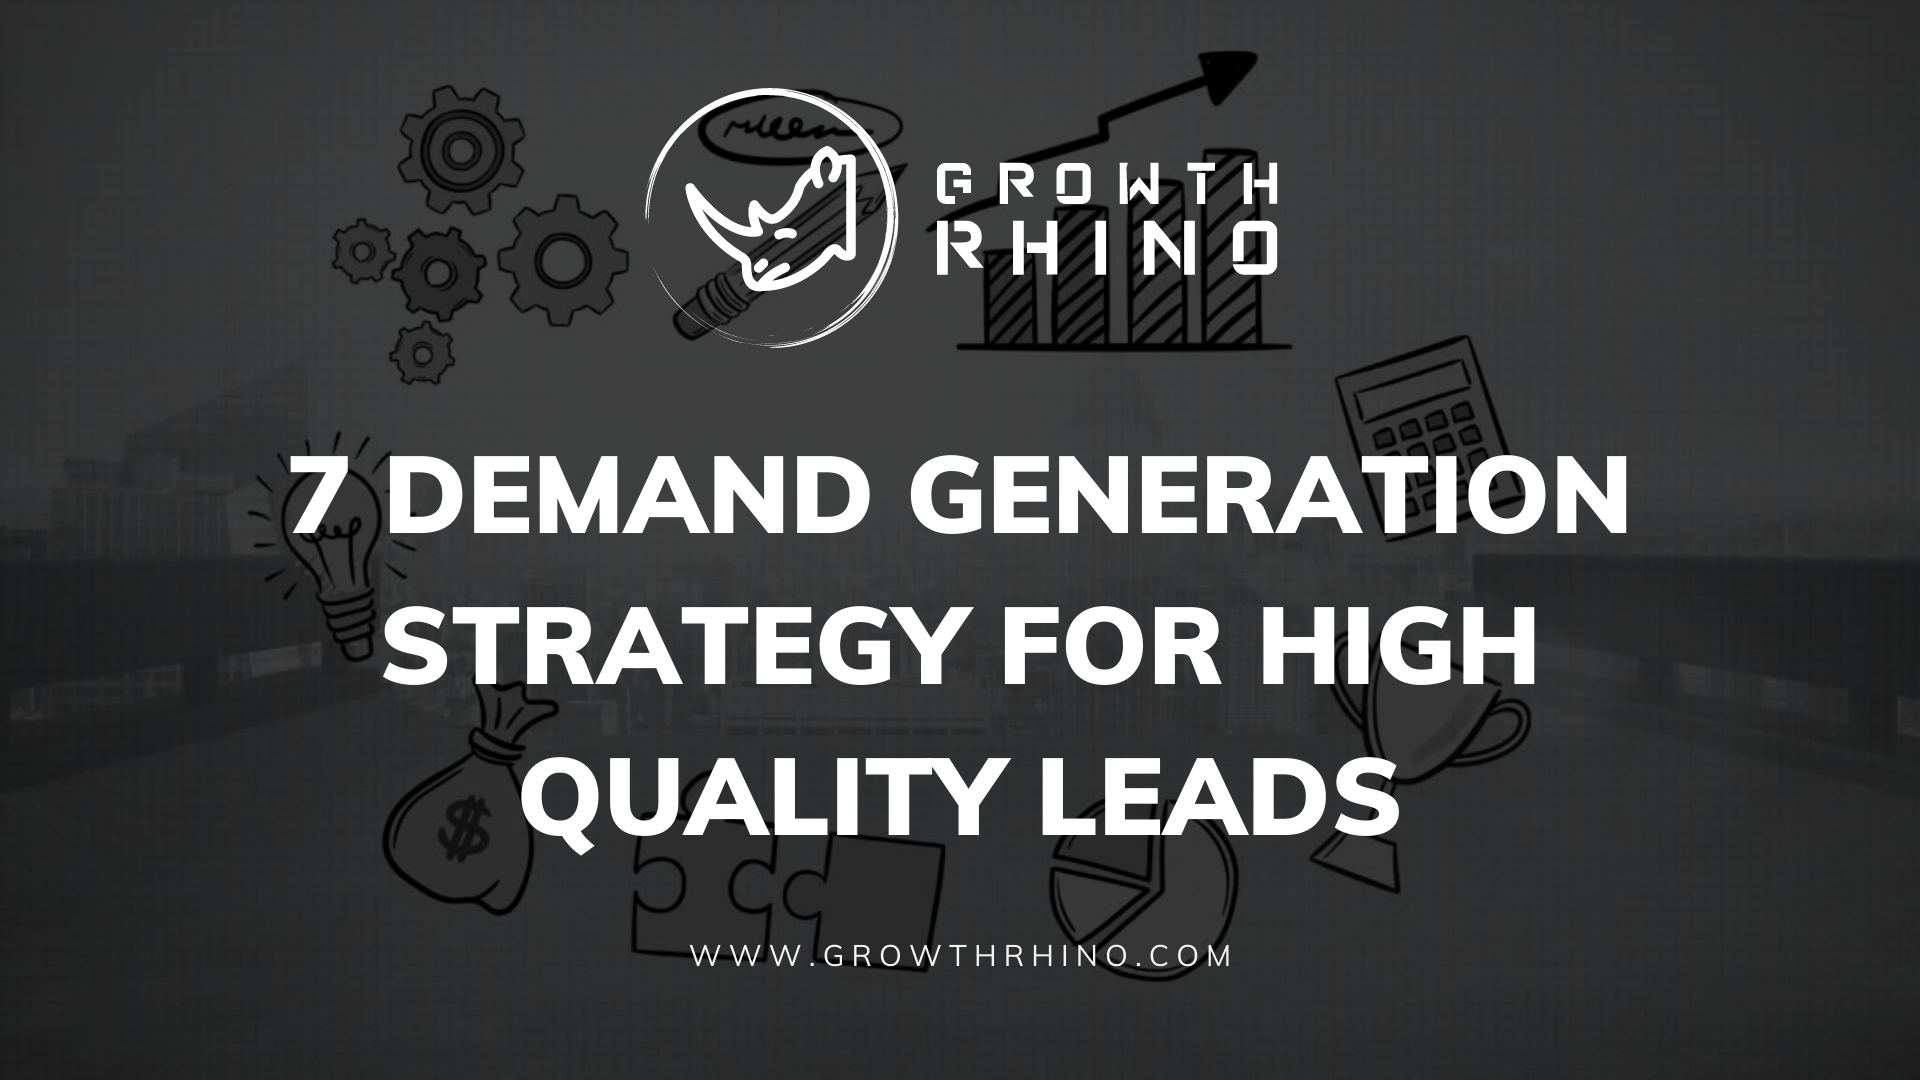 7 Demand Generation Strategy for High Quality Leads